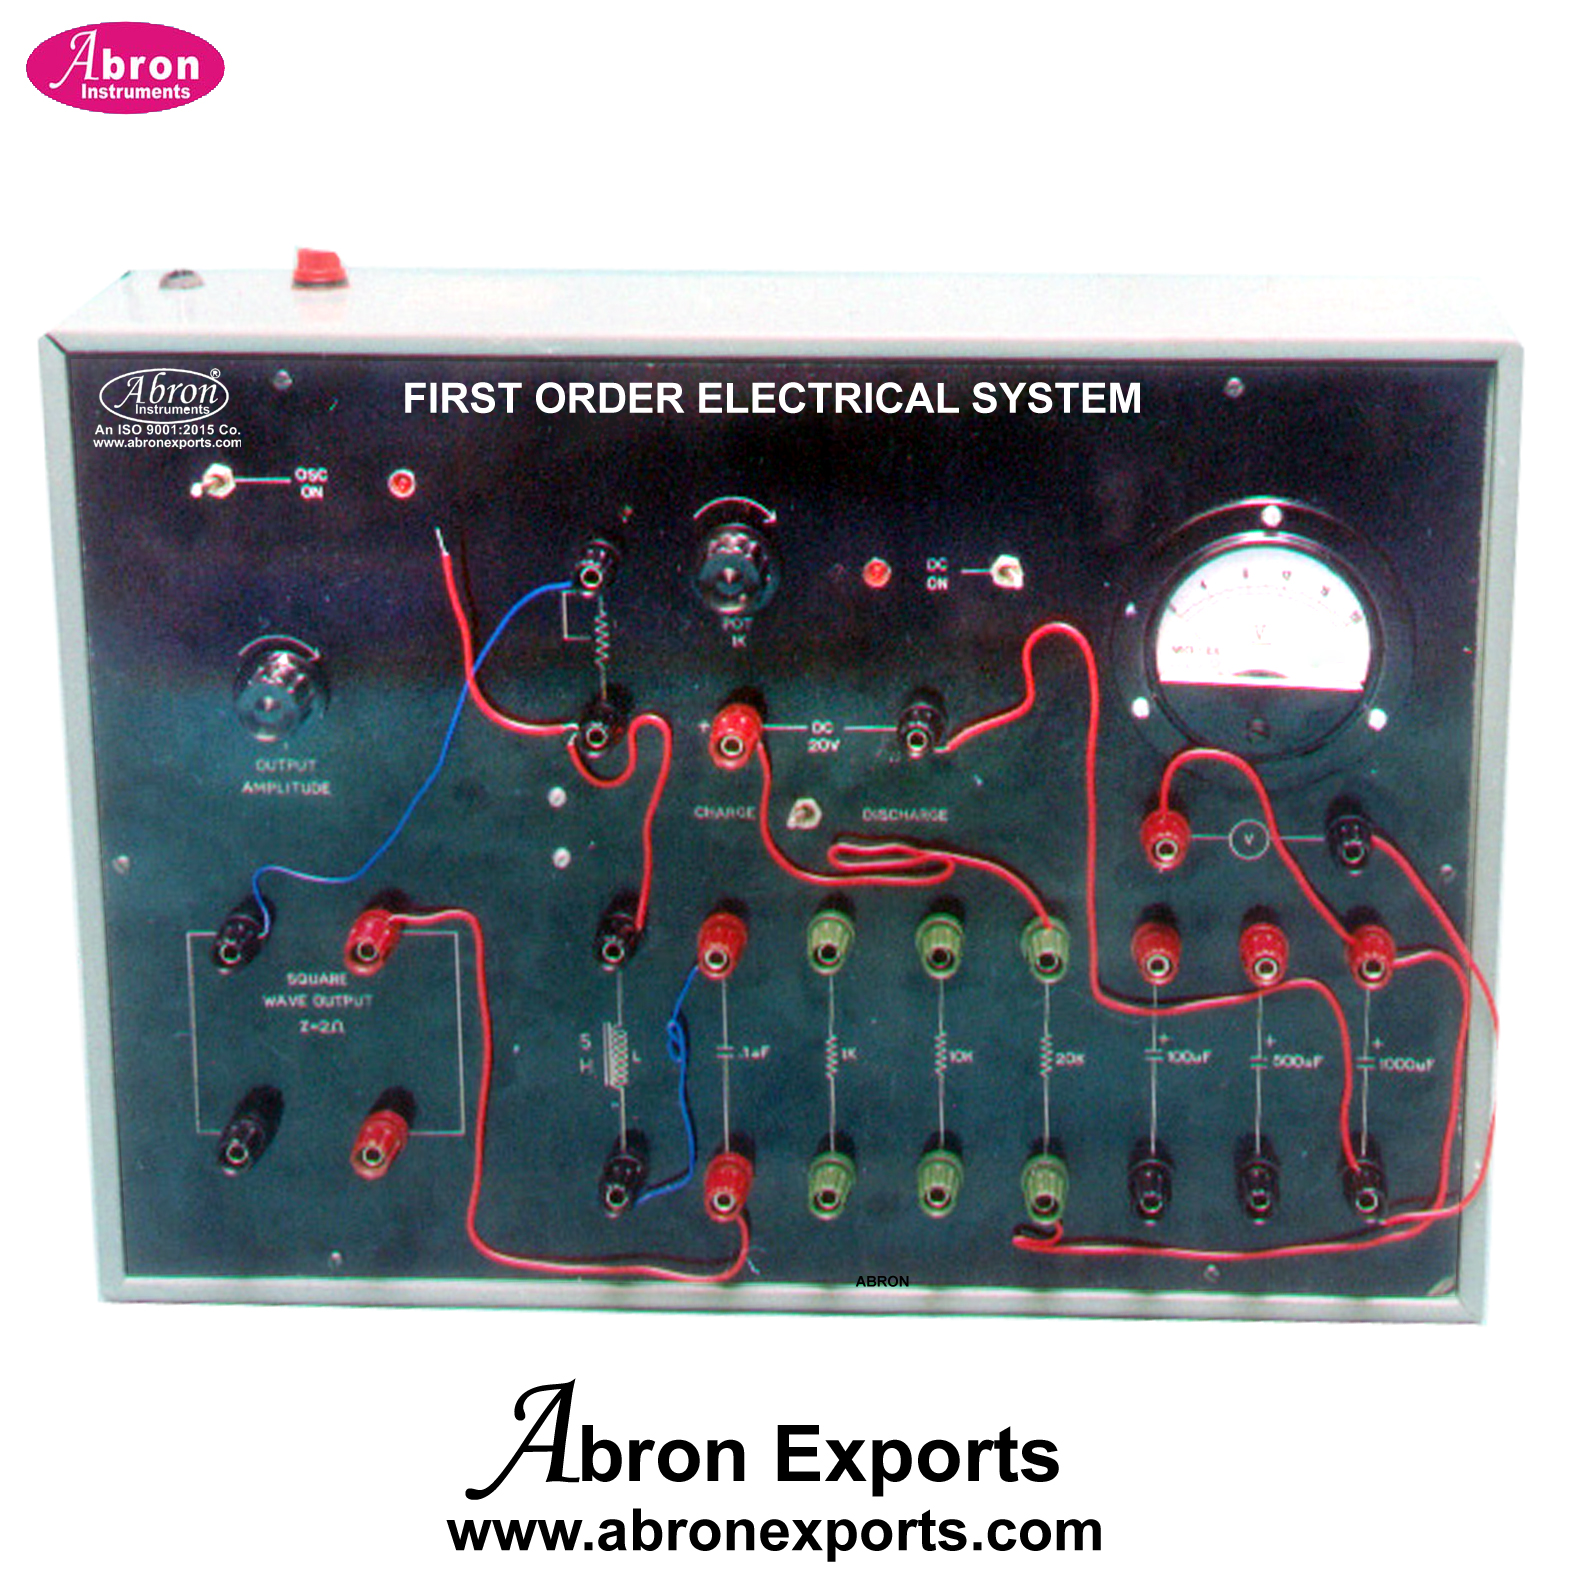 ETB Study First Order Electrical System With 1Meter Training Board Supply Abron AE-1258FO 